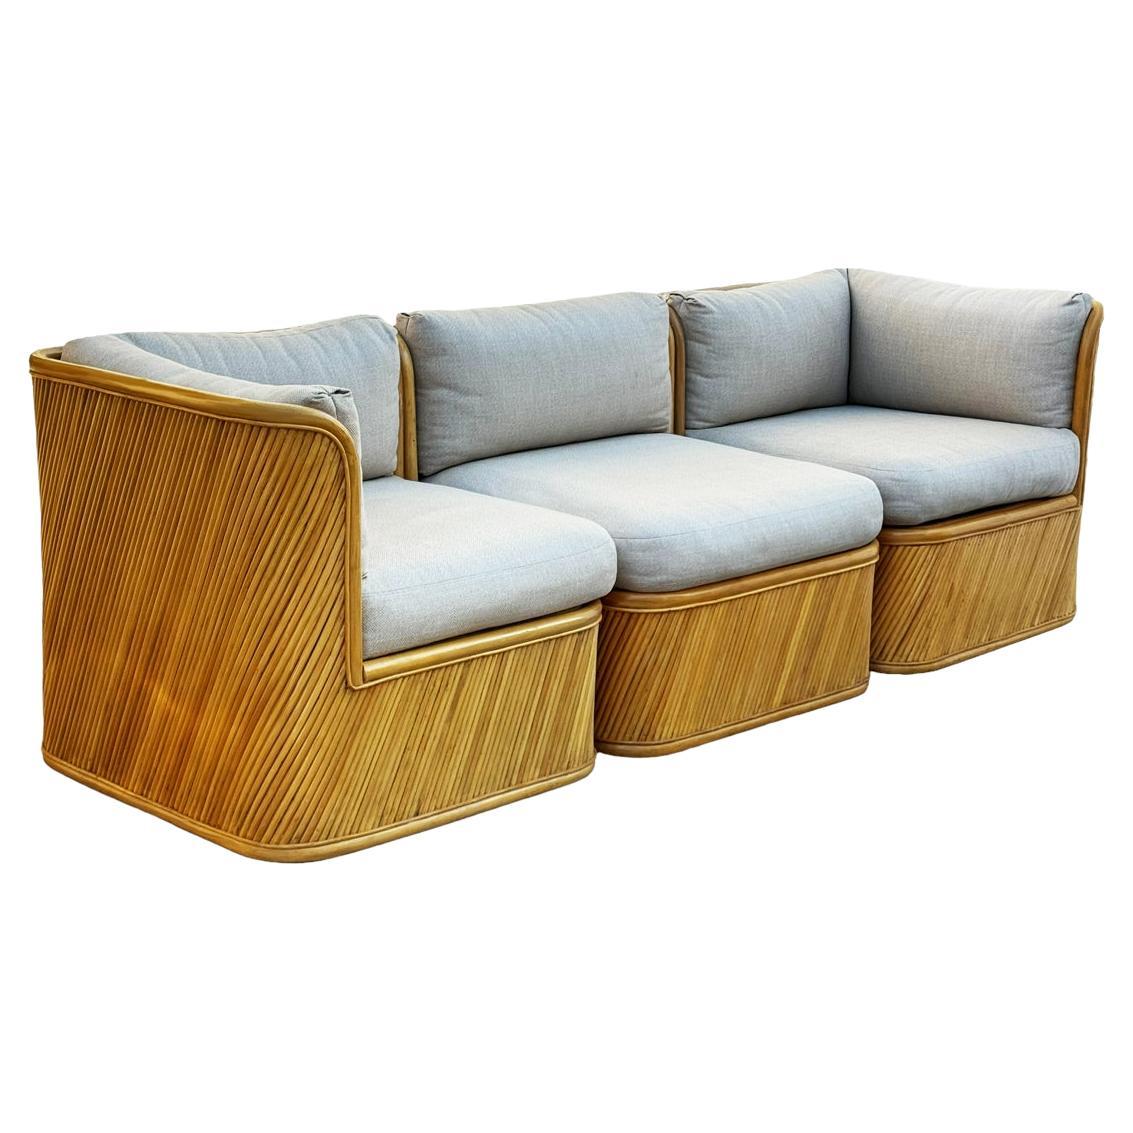 Mid-Century Modern Bamboo Pencil Reed Modular or Sectional Sofa with New Cushion For Sale